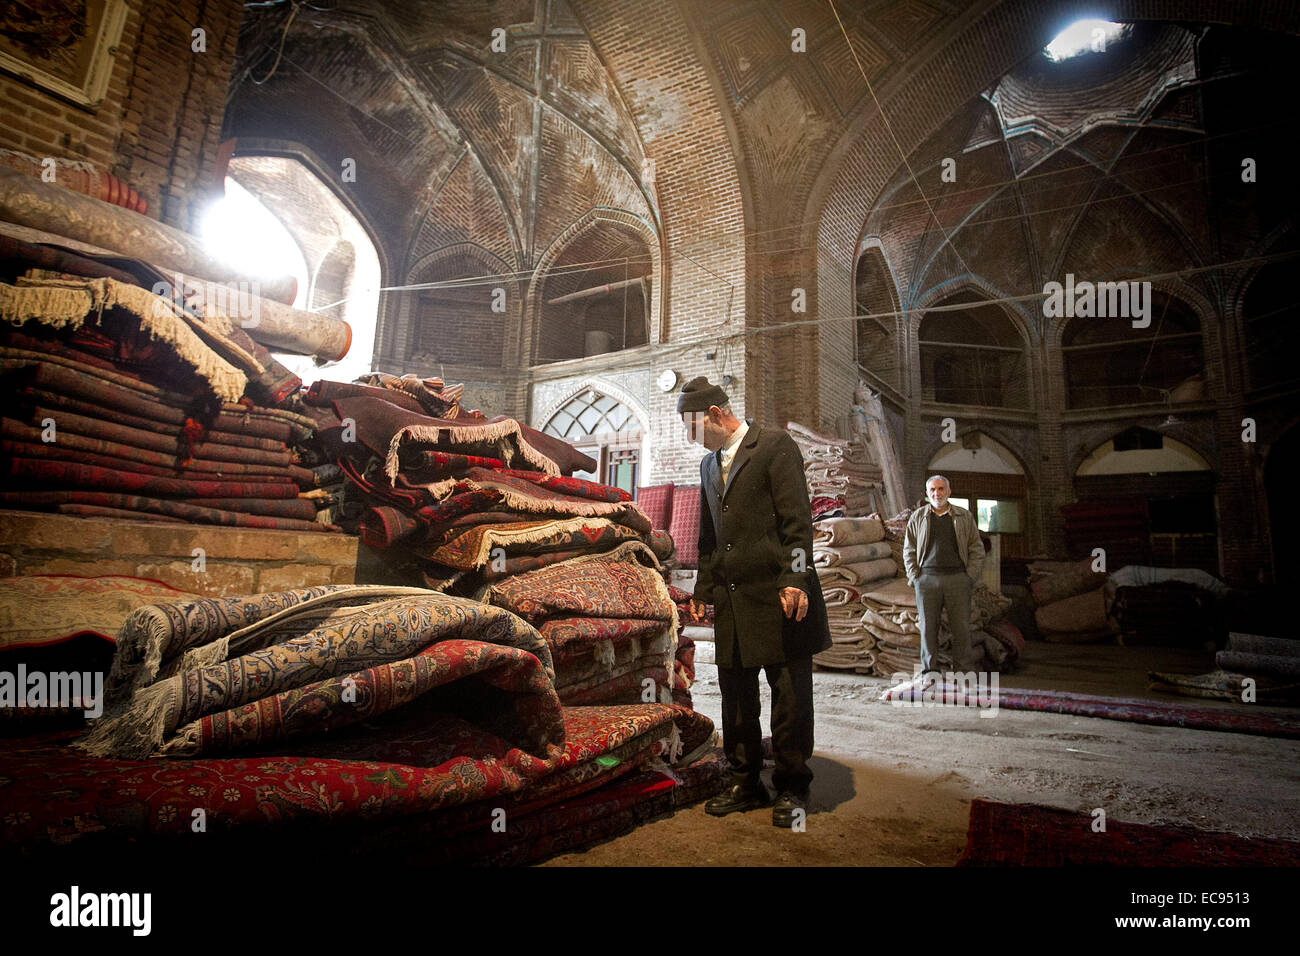 Tehran, Iran. 10th Dec, 2014. A man looks at Iranian carpets at an old bazaar in the city of Qazvin, Iran, on Dec. 10, 2014. Qazvin is an important city station of silk road. Recently the city has been elected as the host of Silk Road Forum for 2016, to be held on Aug. 30. © Ahmad Halabisaz/Xinhua/Alamy Live News Stock Photo